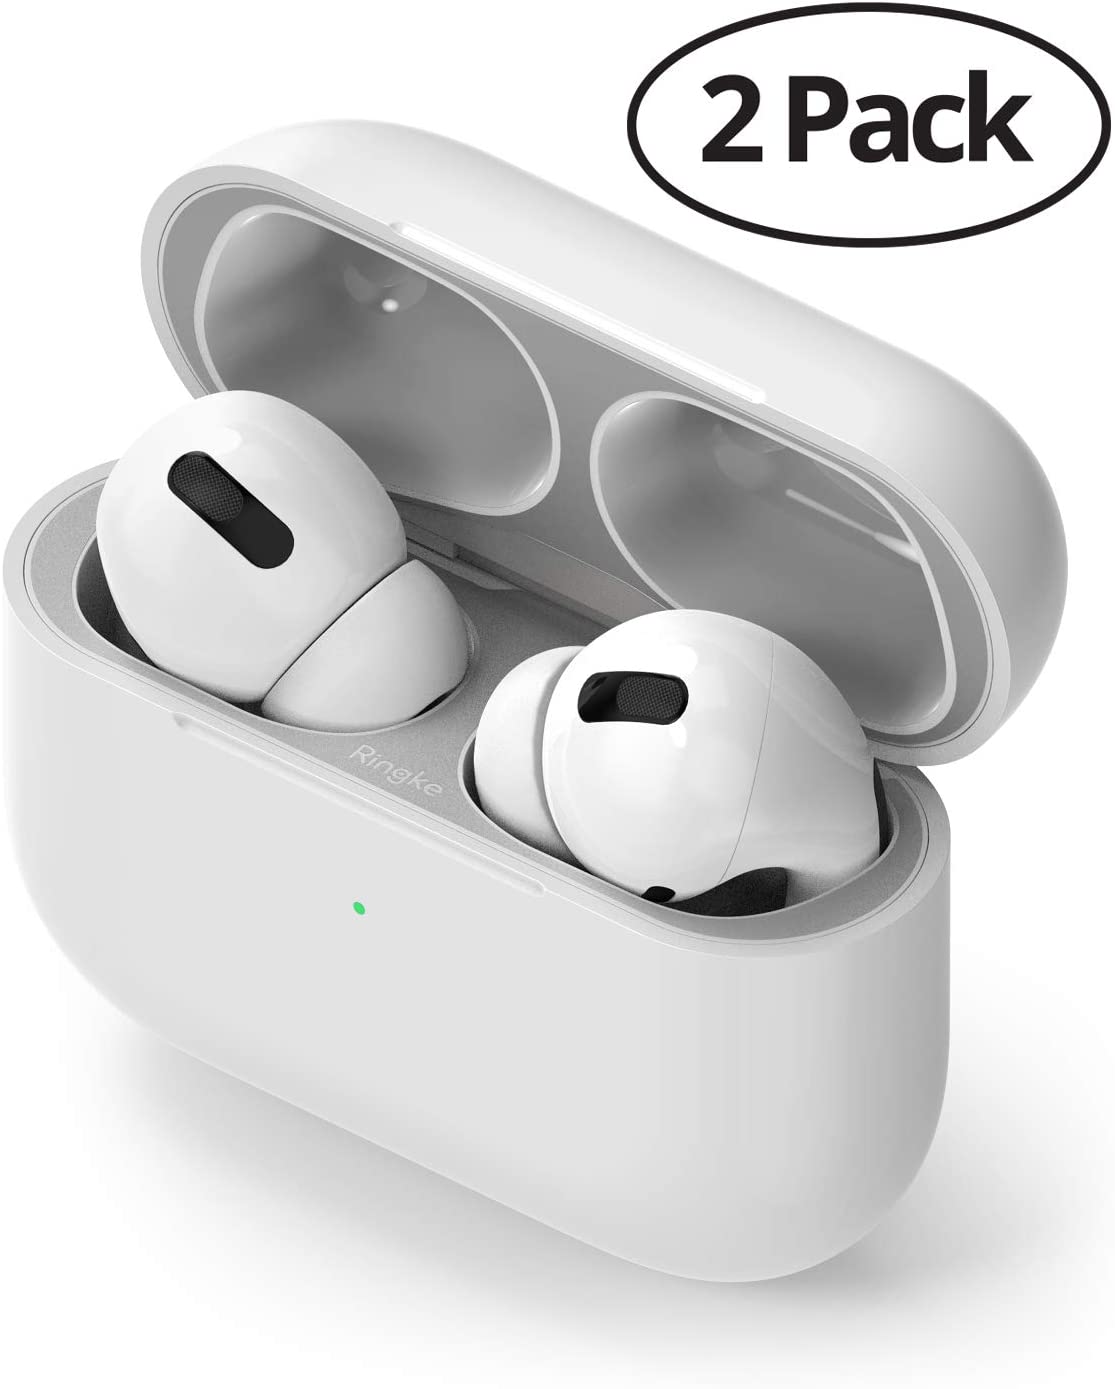 Ringke Dust Guard Sticker for Airpods Pro/Airpods 1/2(2pack)